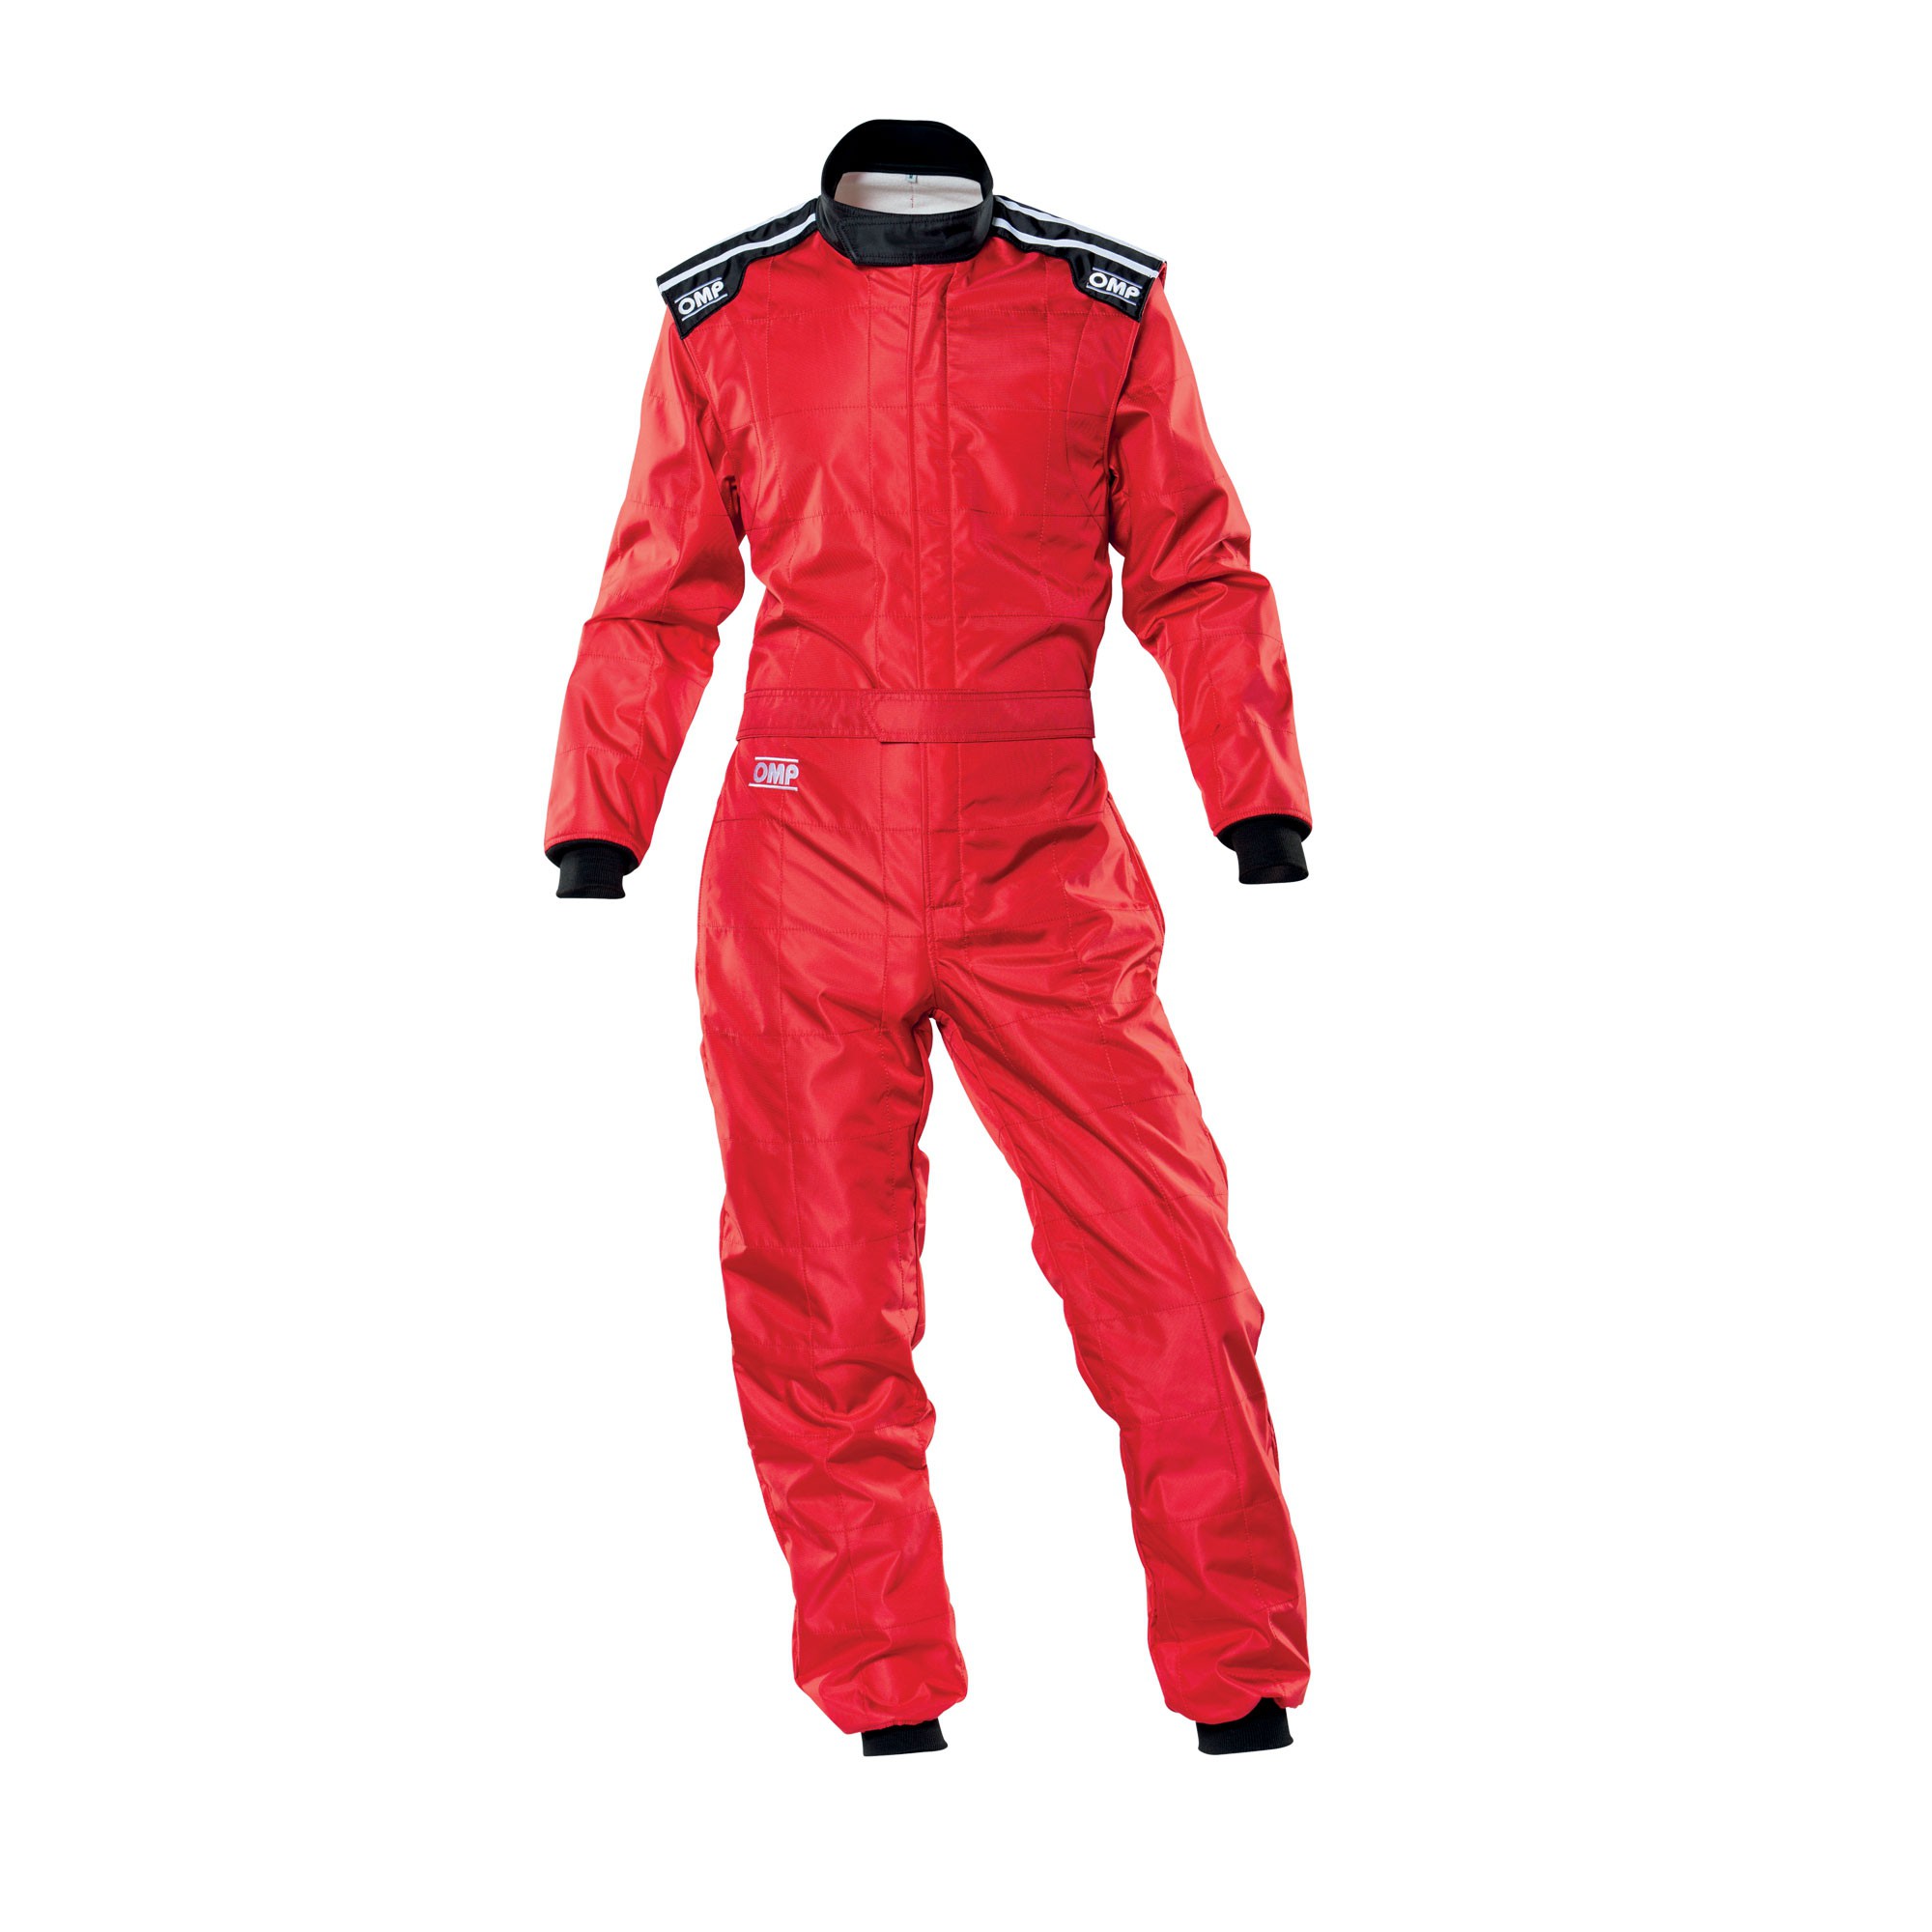 KS-4 OVERALL my2021 RED SIZE 120 FOR CHILDREN